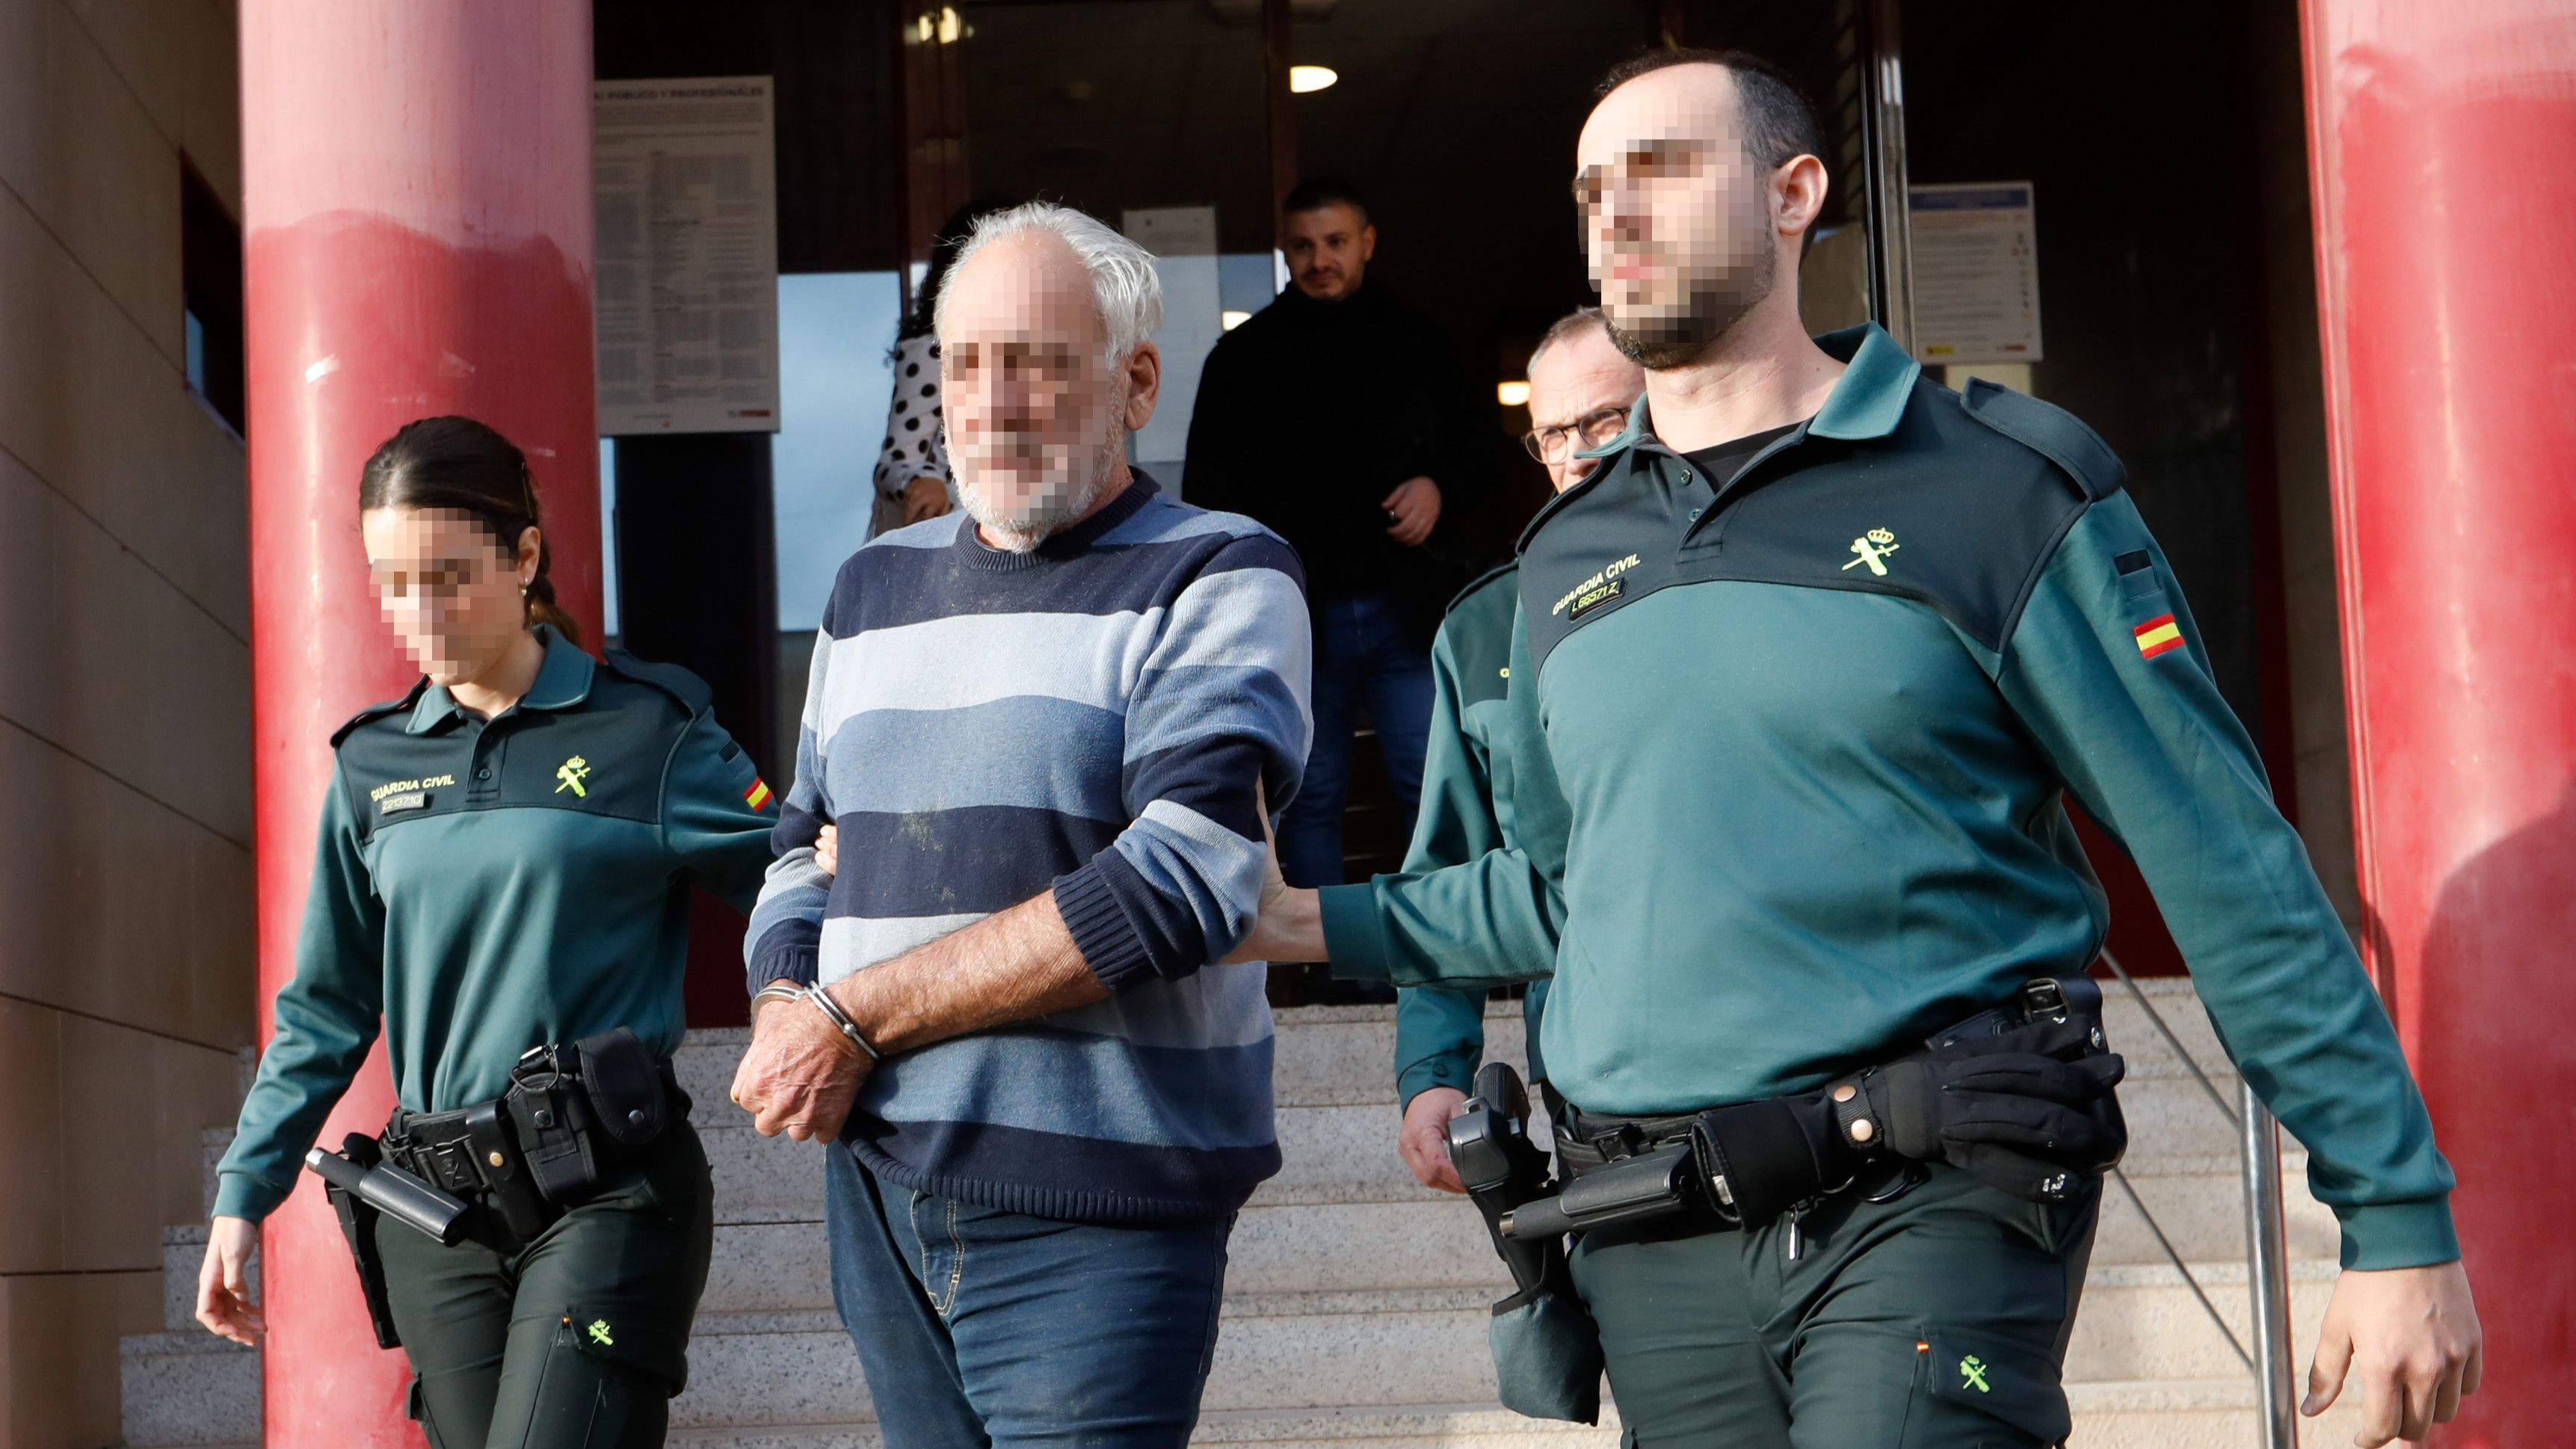 The accused of allegedly killing his associate in Mazarrón enters provisional jail